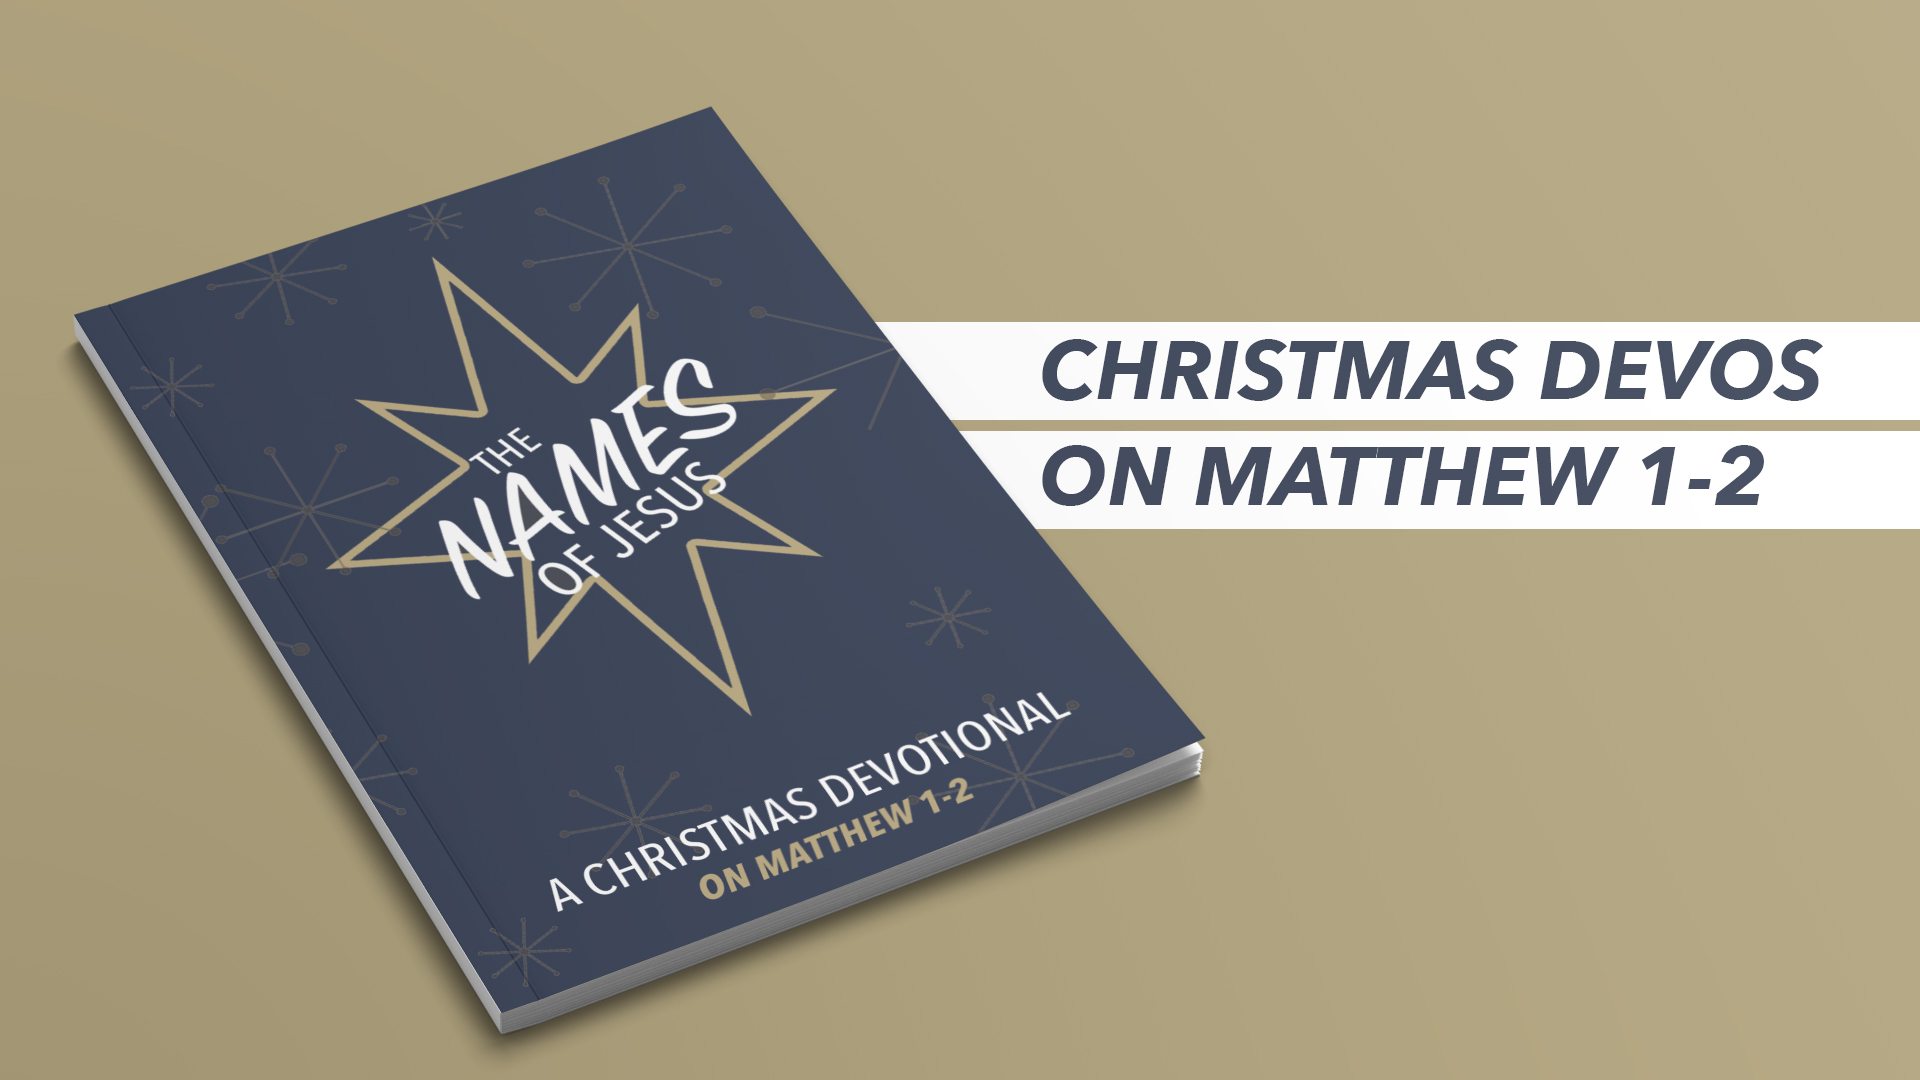 CHRISTMAS DEVOTIONAL (FREE) For Ministry Resources